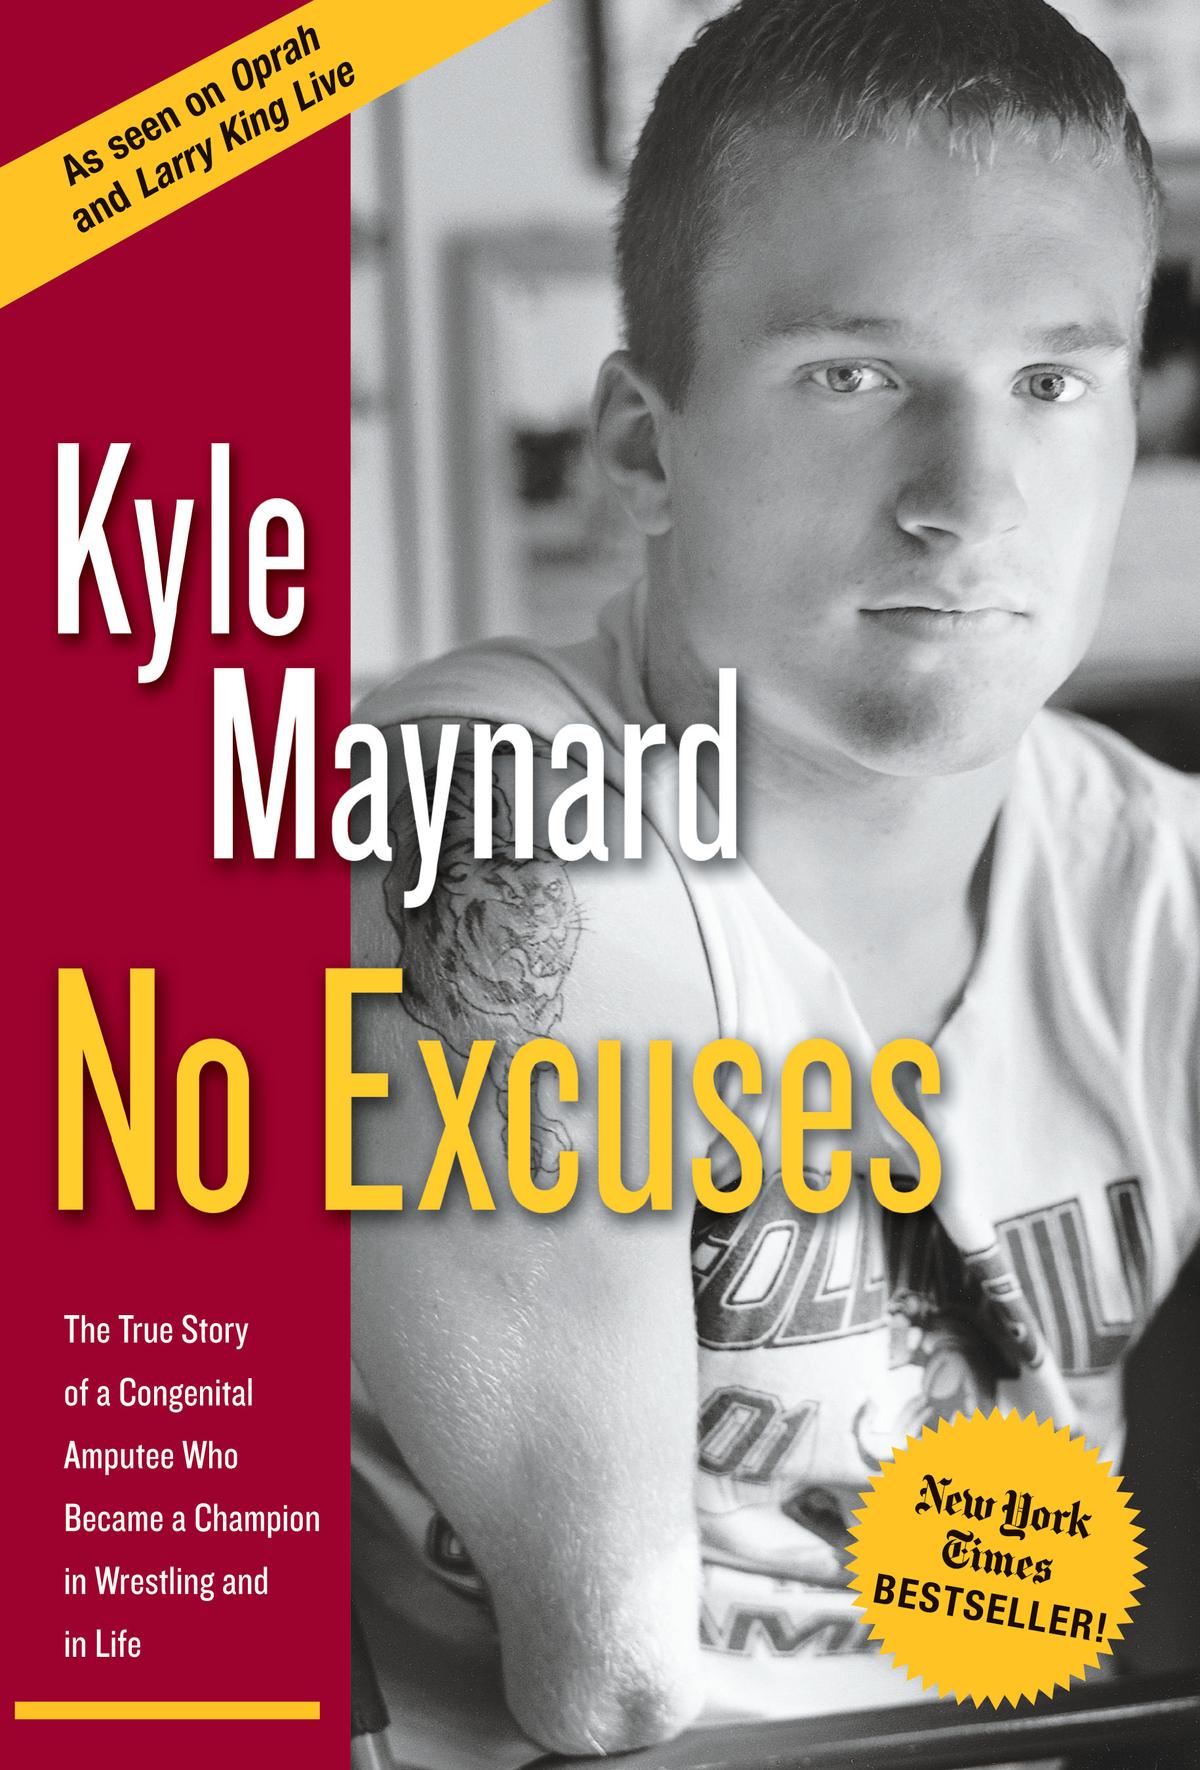 Kyle Maynard is the author of the New York Times' best-selling book "No Excuses." (Photo courtesy of <a href="https://www.kyle-maynard.com/">Kyle Maynard</a>)